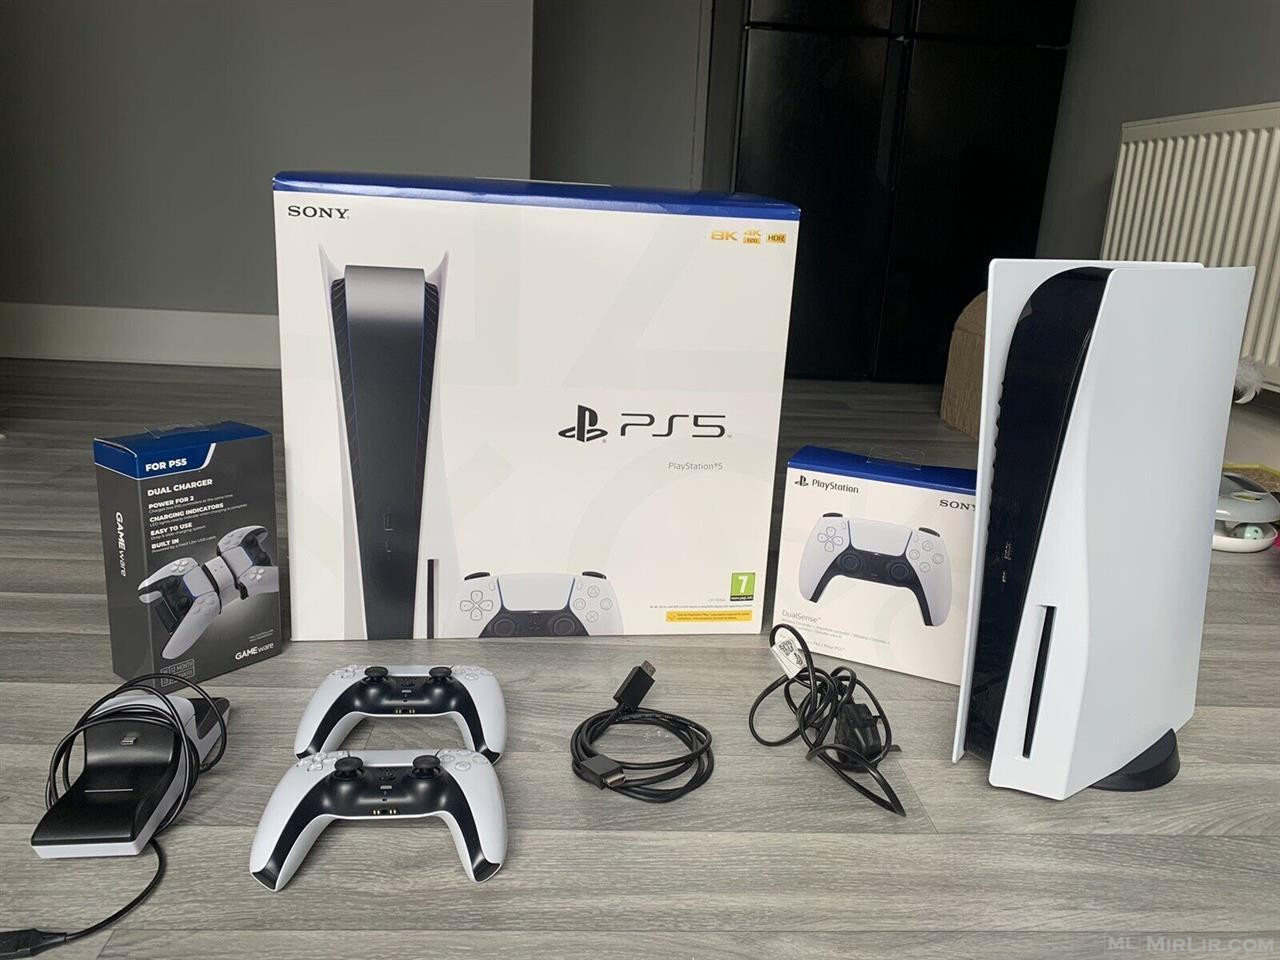 PS5 consule with 2x controllers charging base